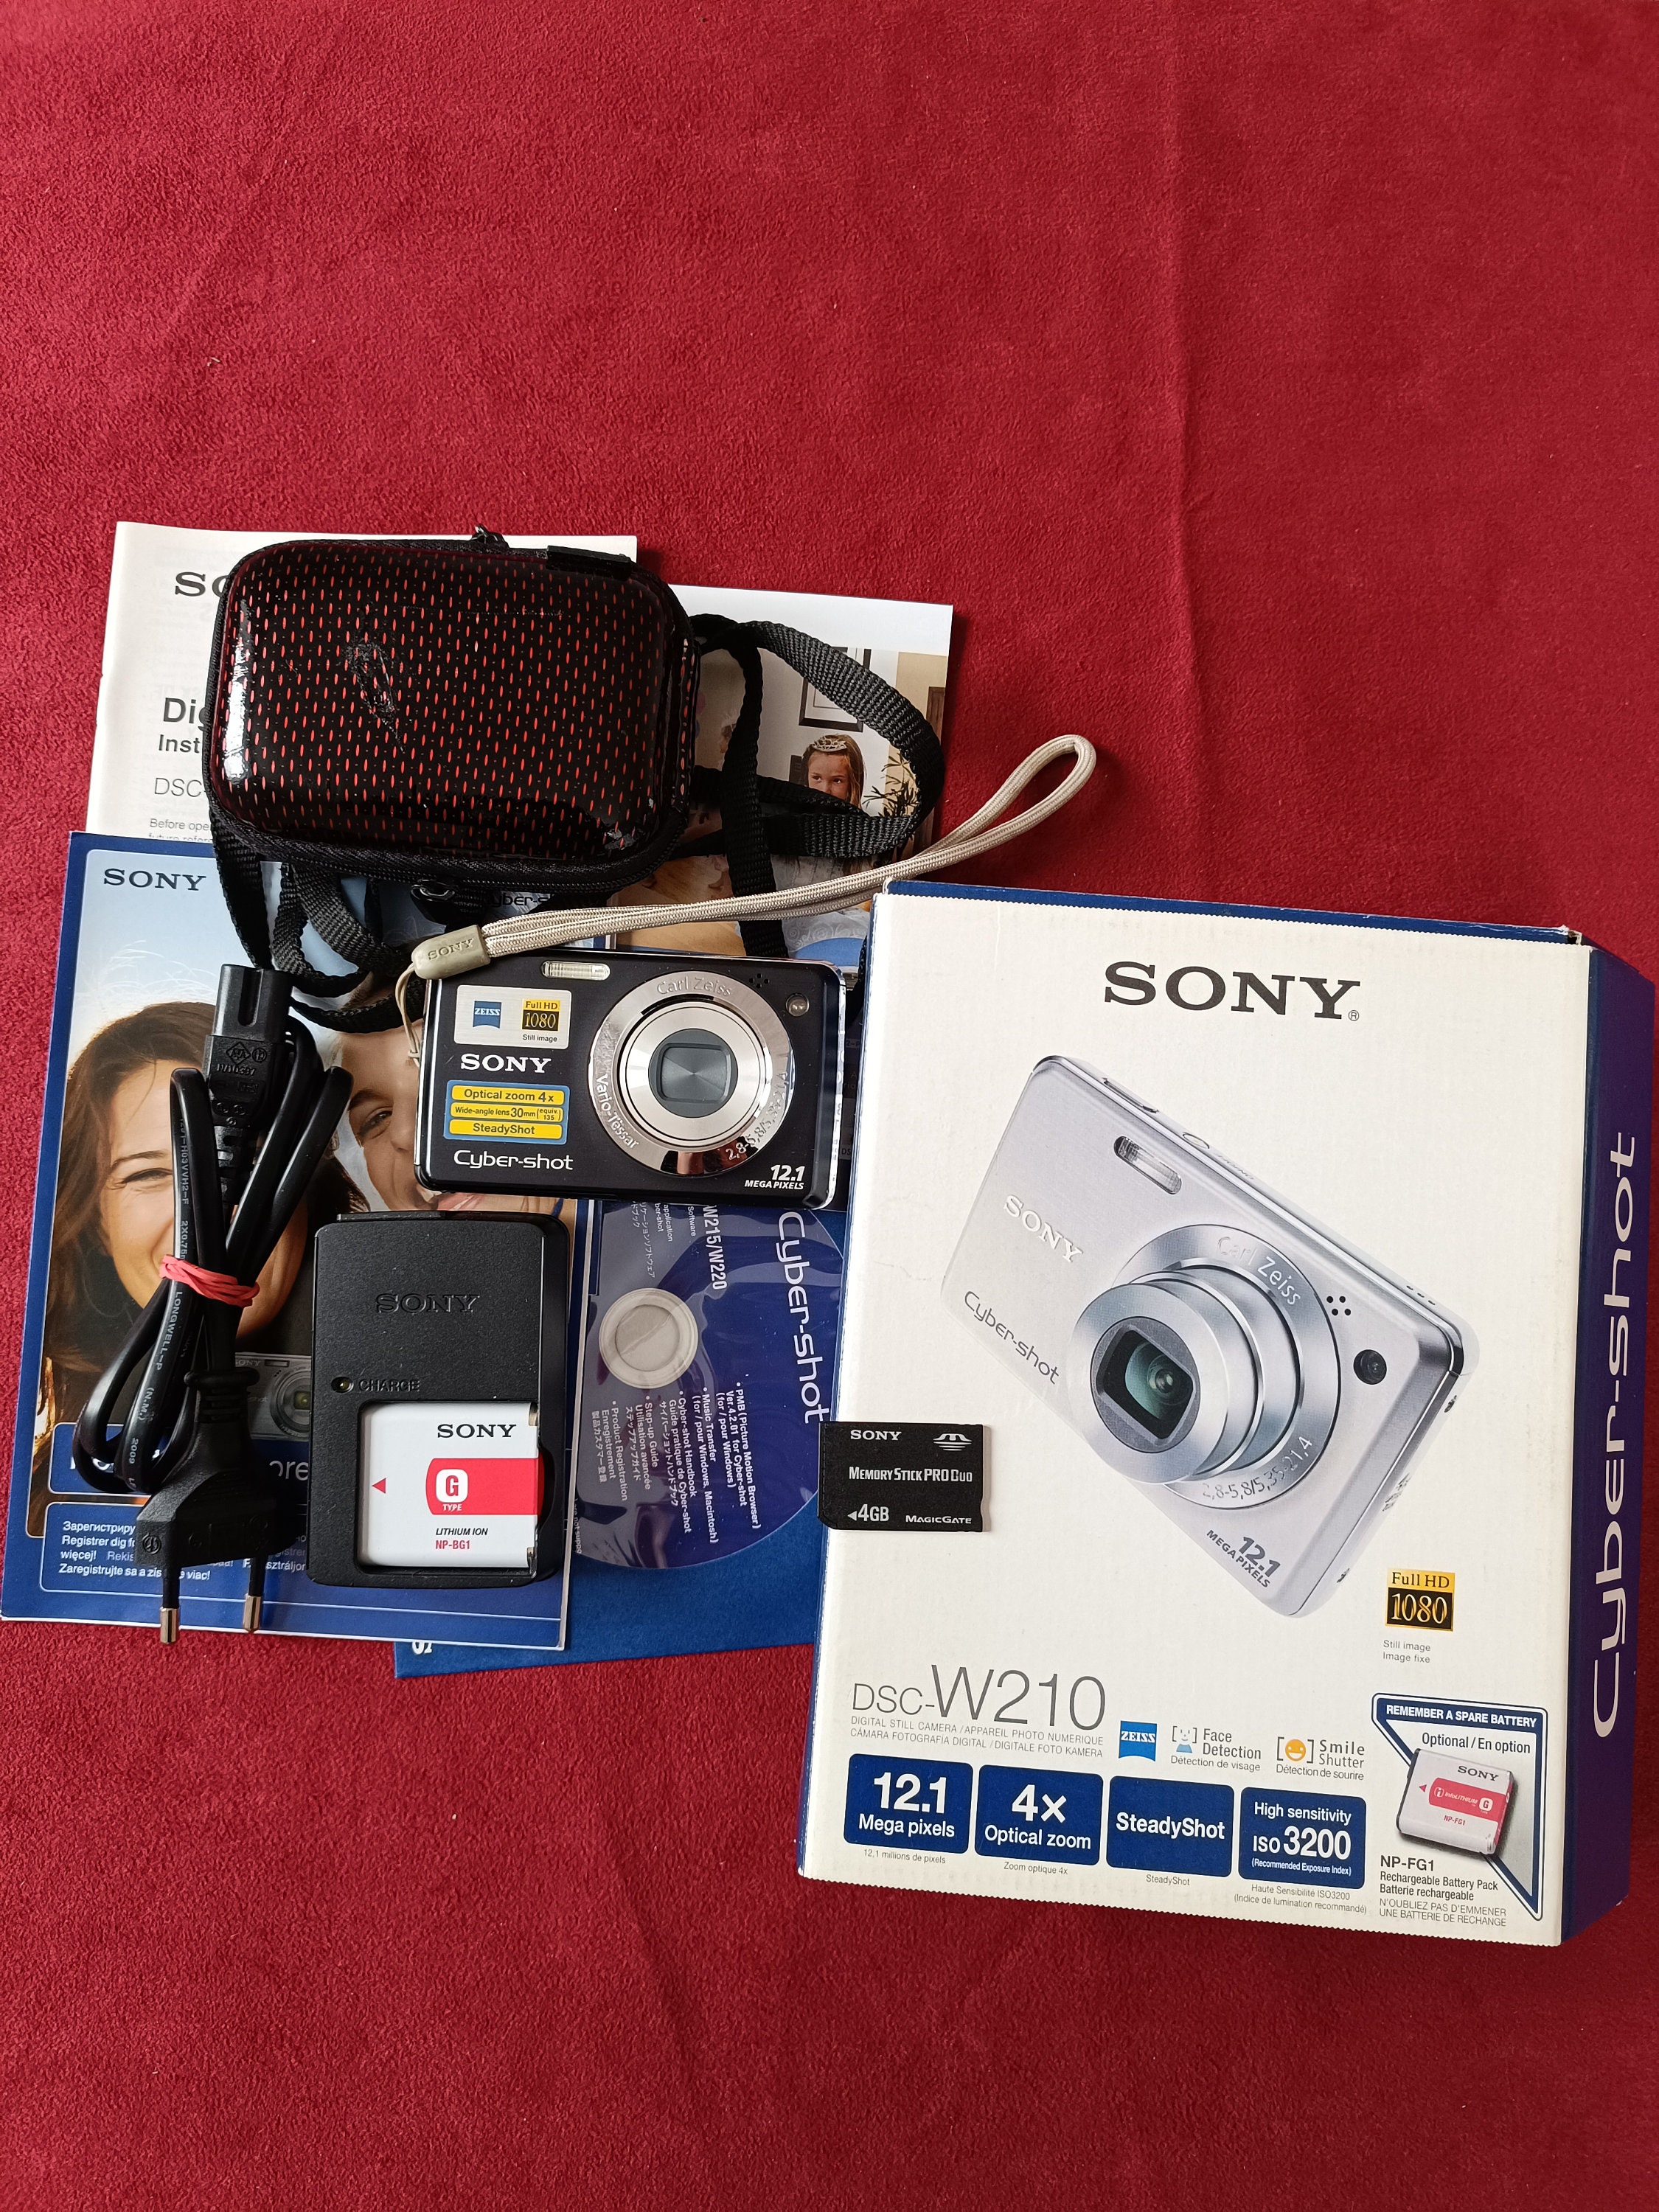 Sony Cybershot DSCW170/R 10.1MP Digital Camera with 5x Optical Zoom with  Super Steady Shot (Red)